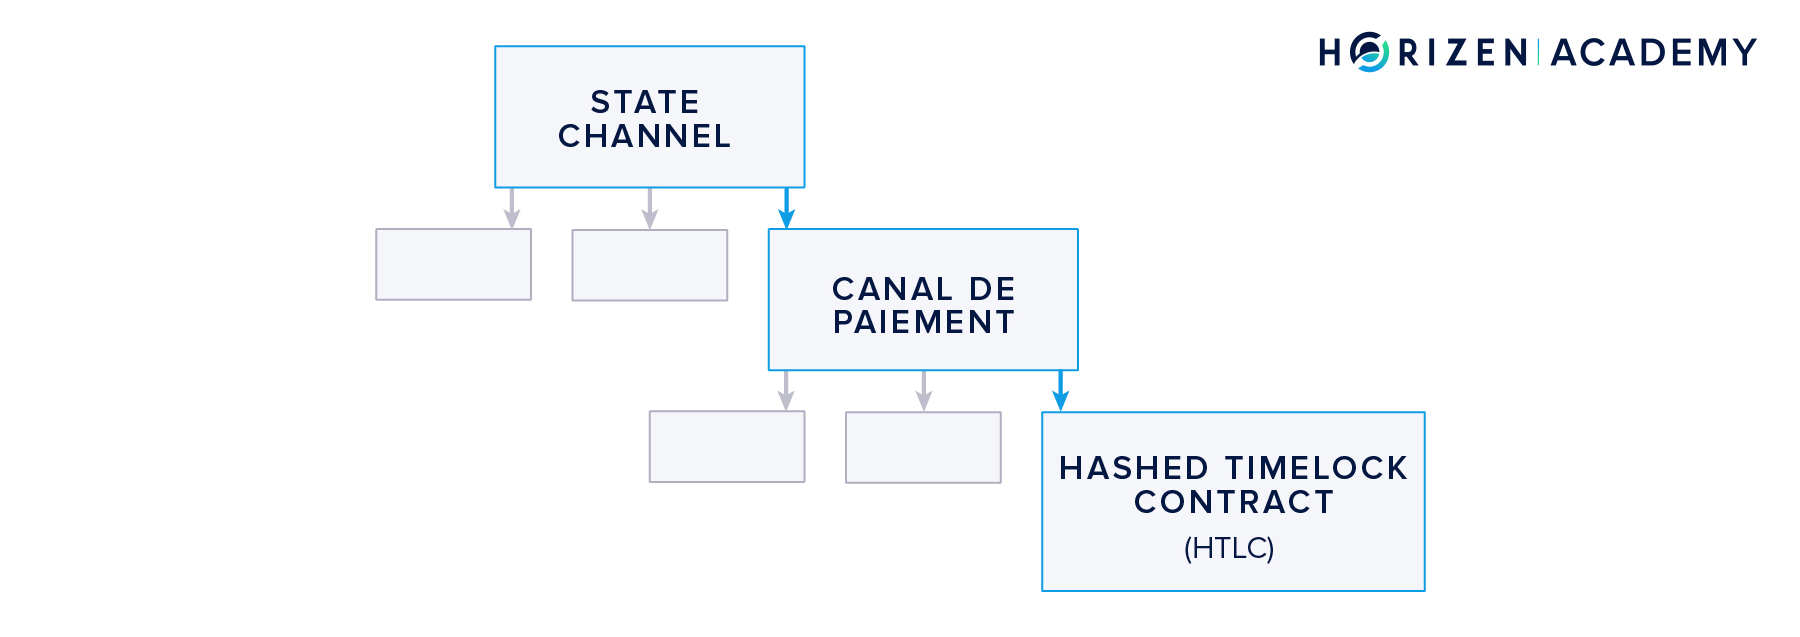 channel hierarchy